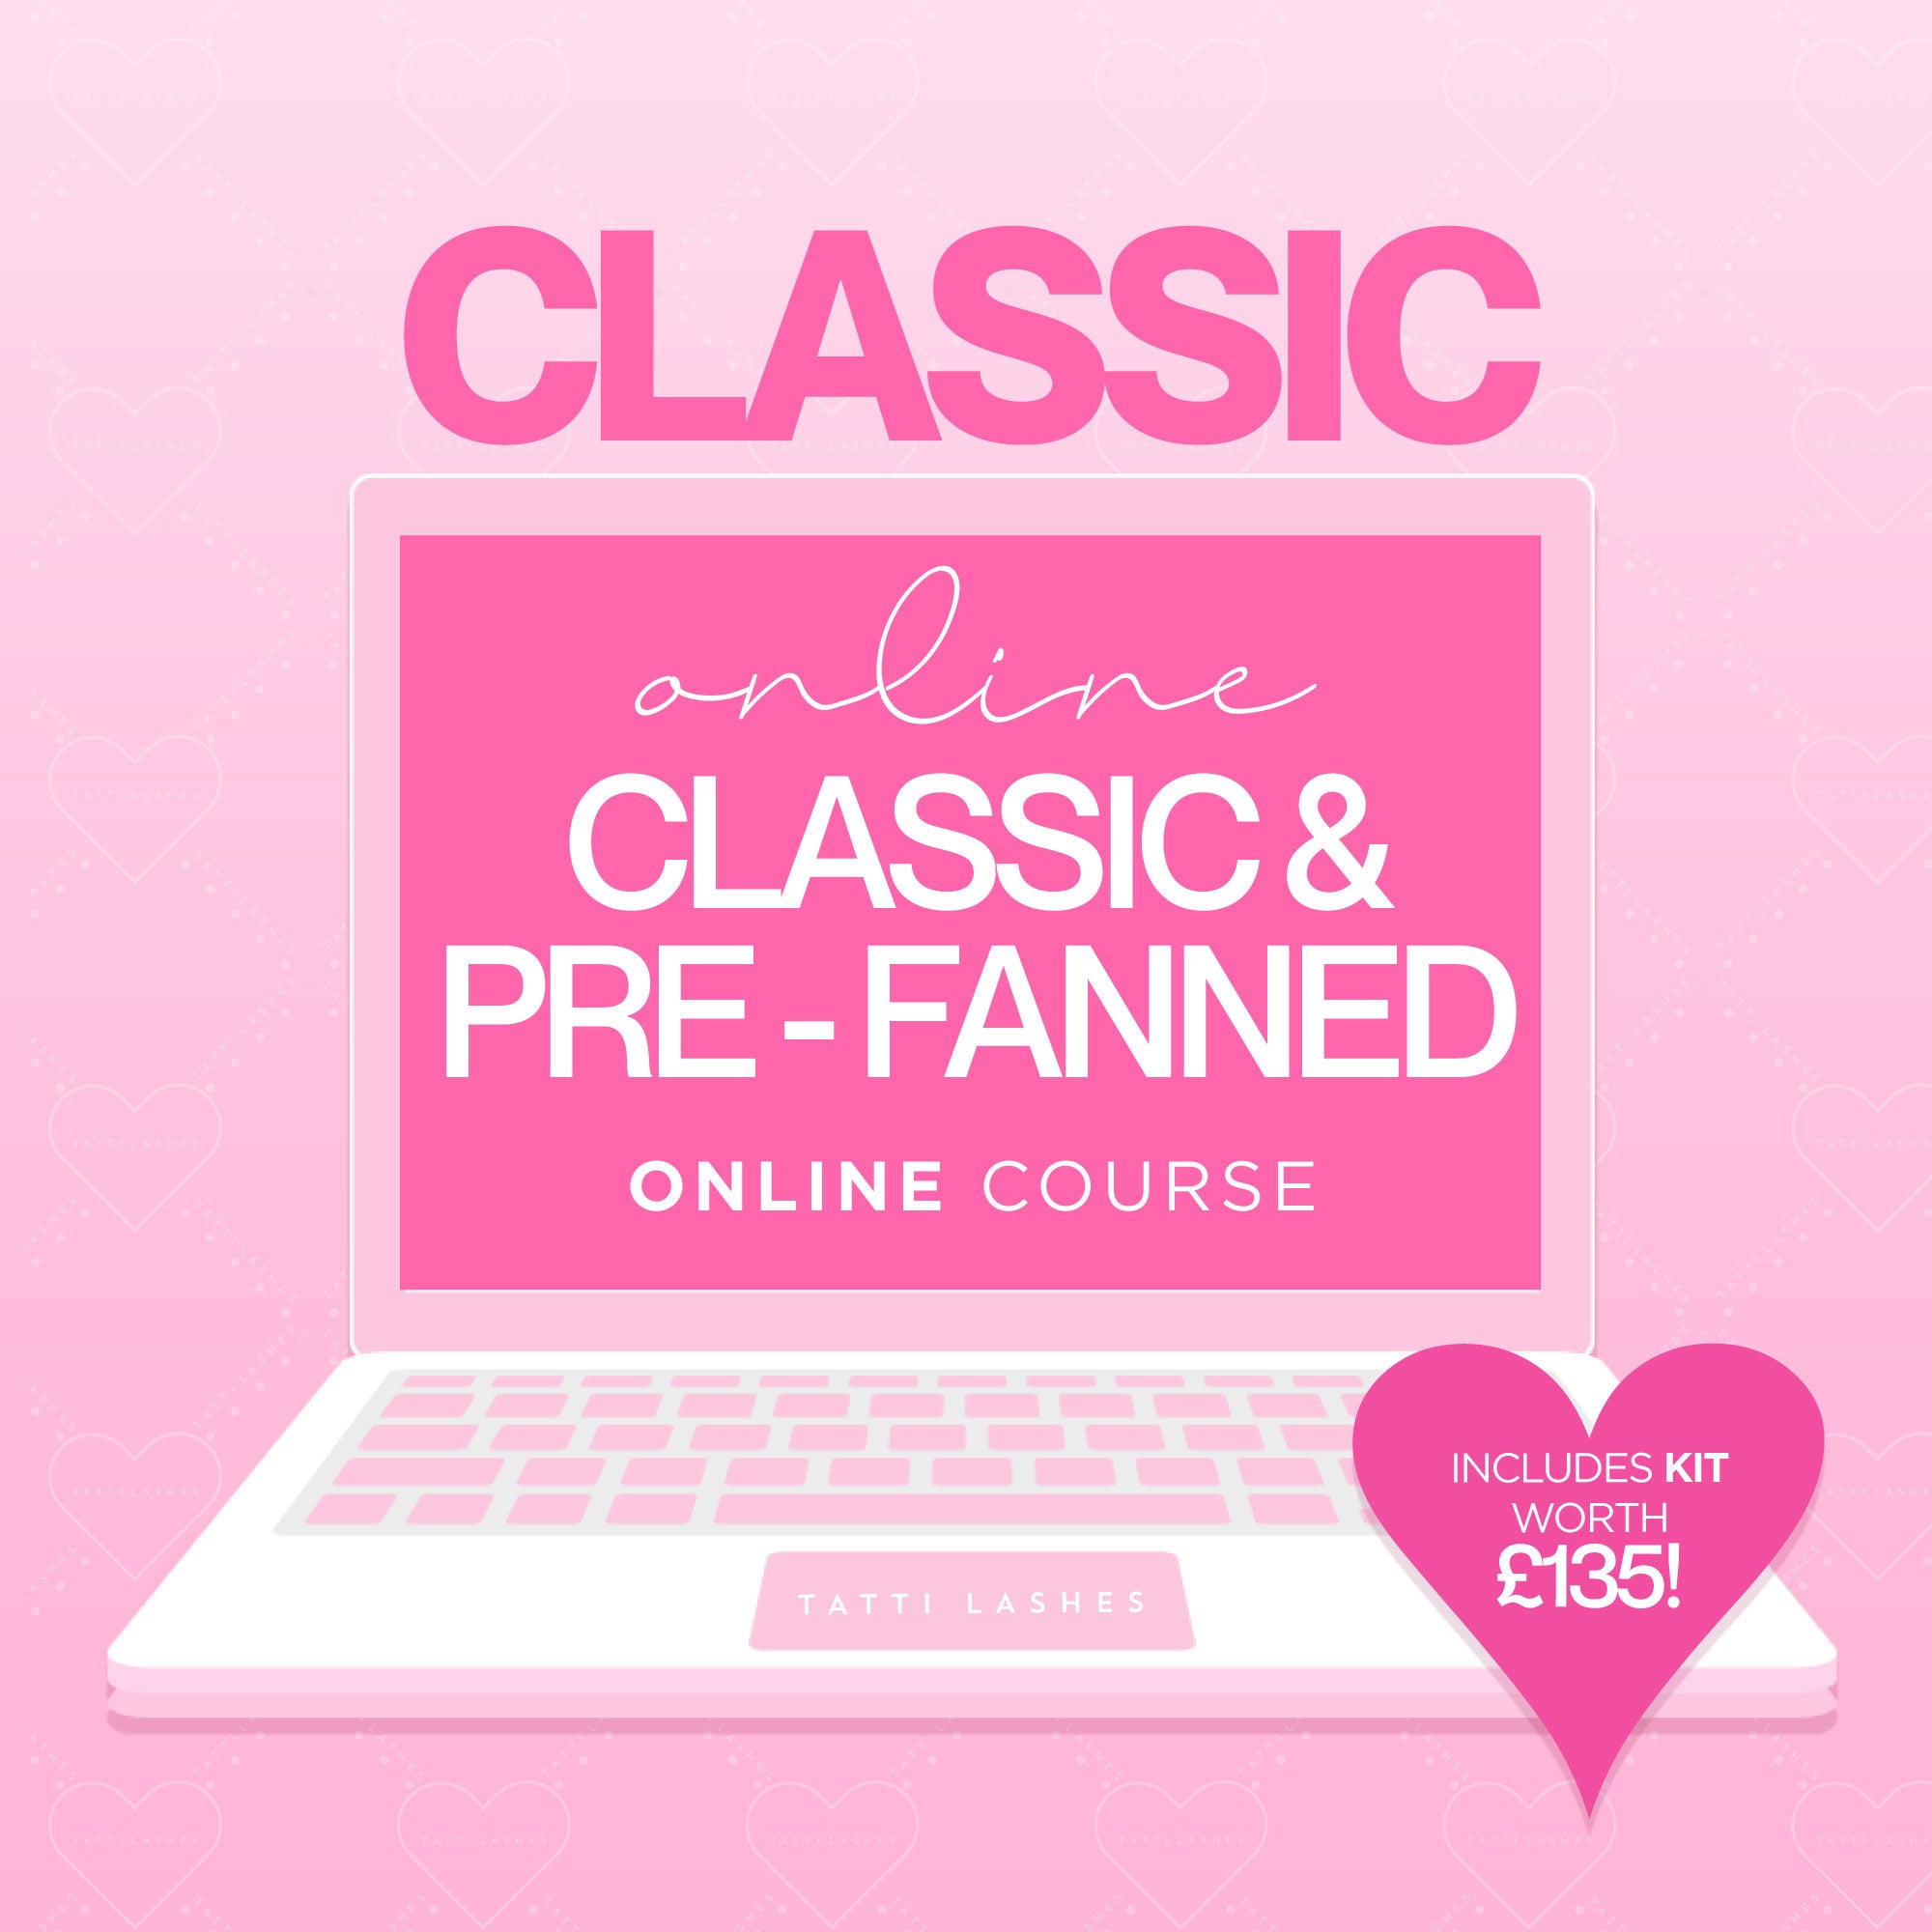 ONLINE CLASSIC LASHES TRAINING COURSE